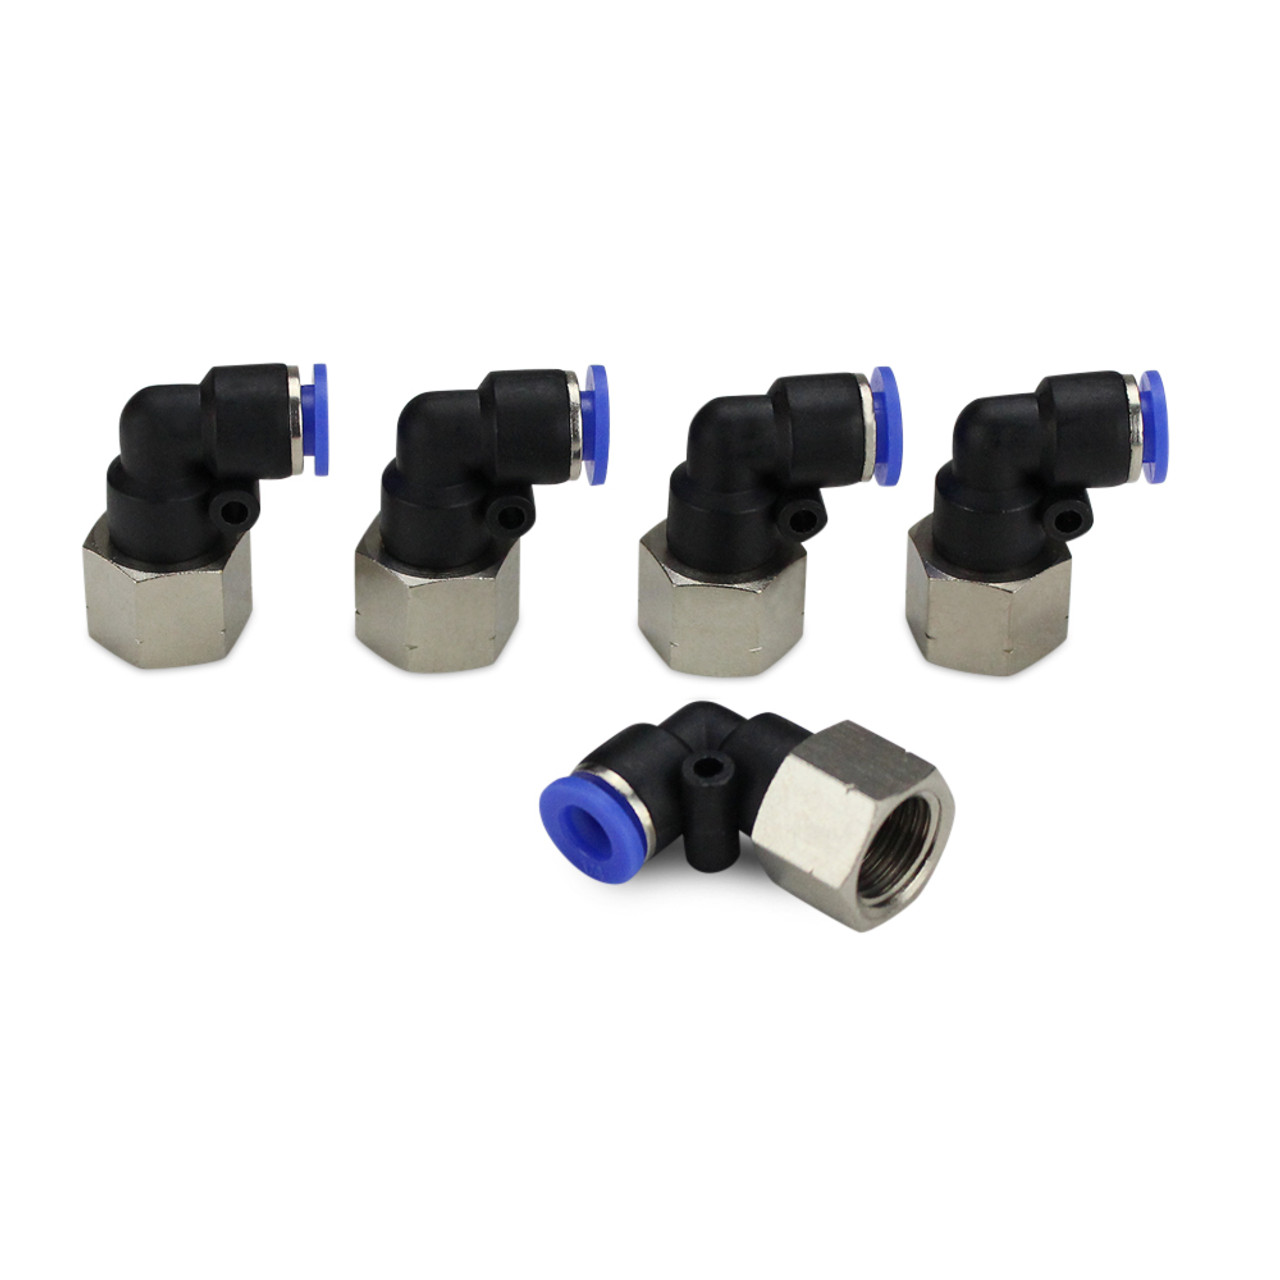 Female Elbow Connector Push Connect Fitting - 5 Pack